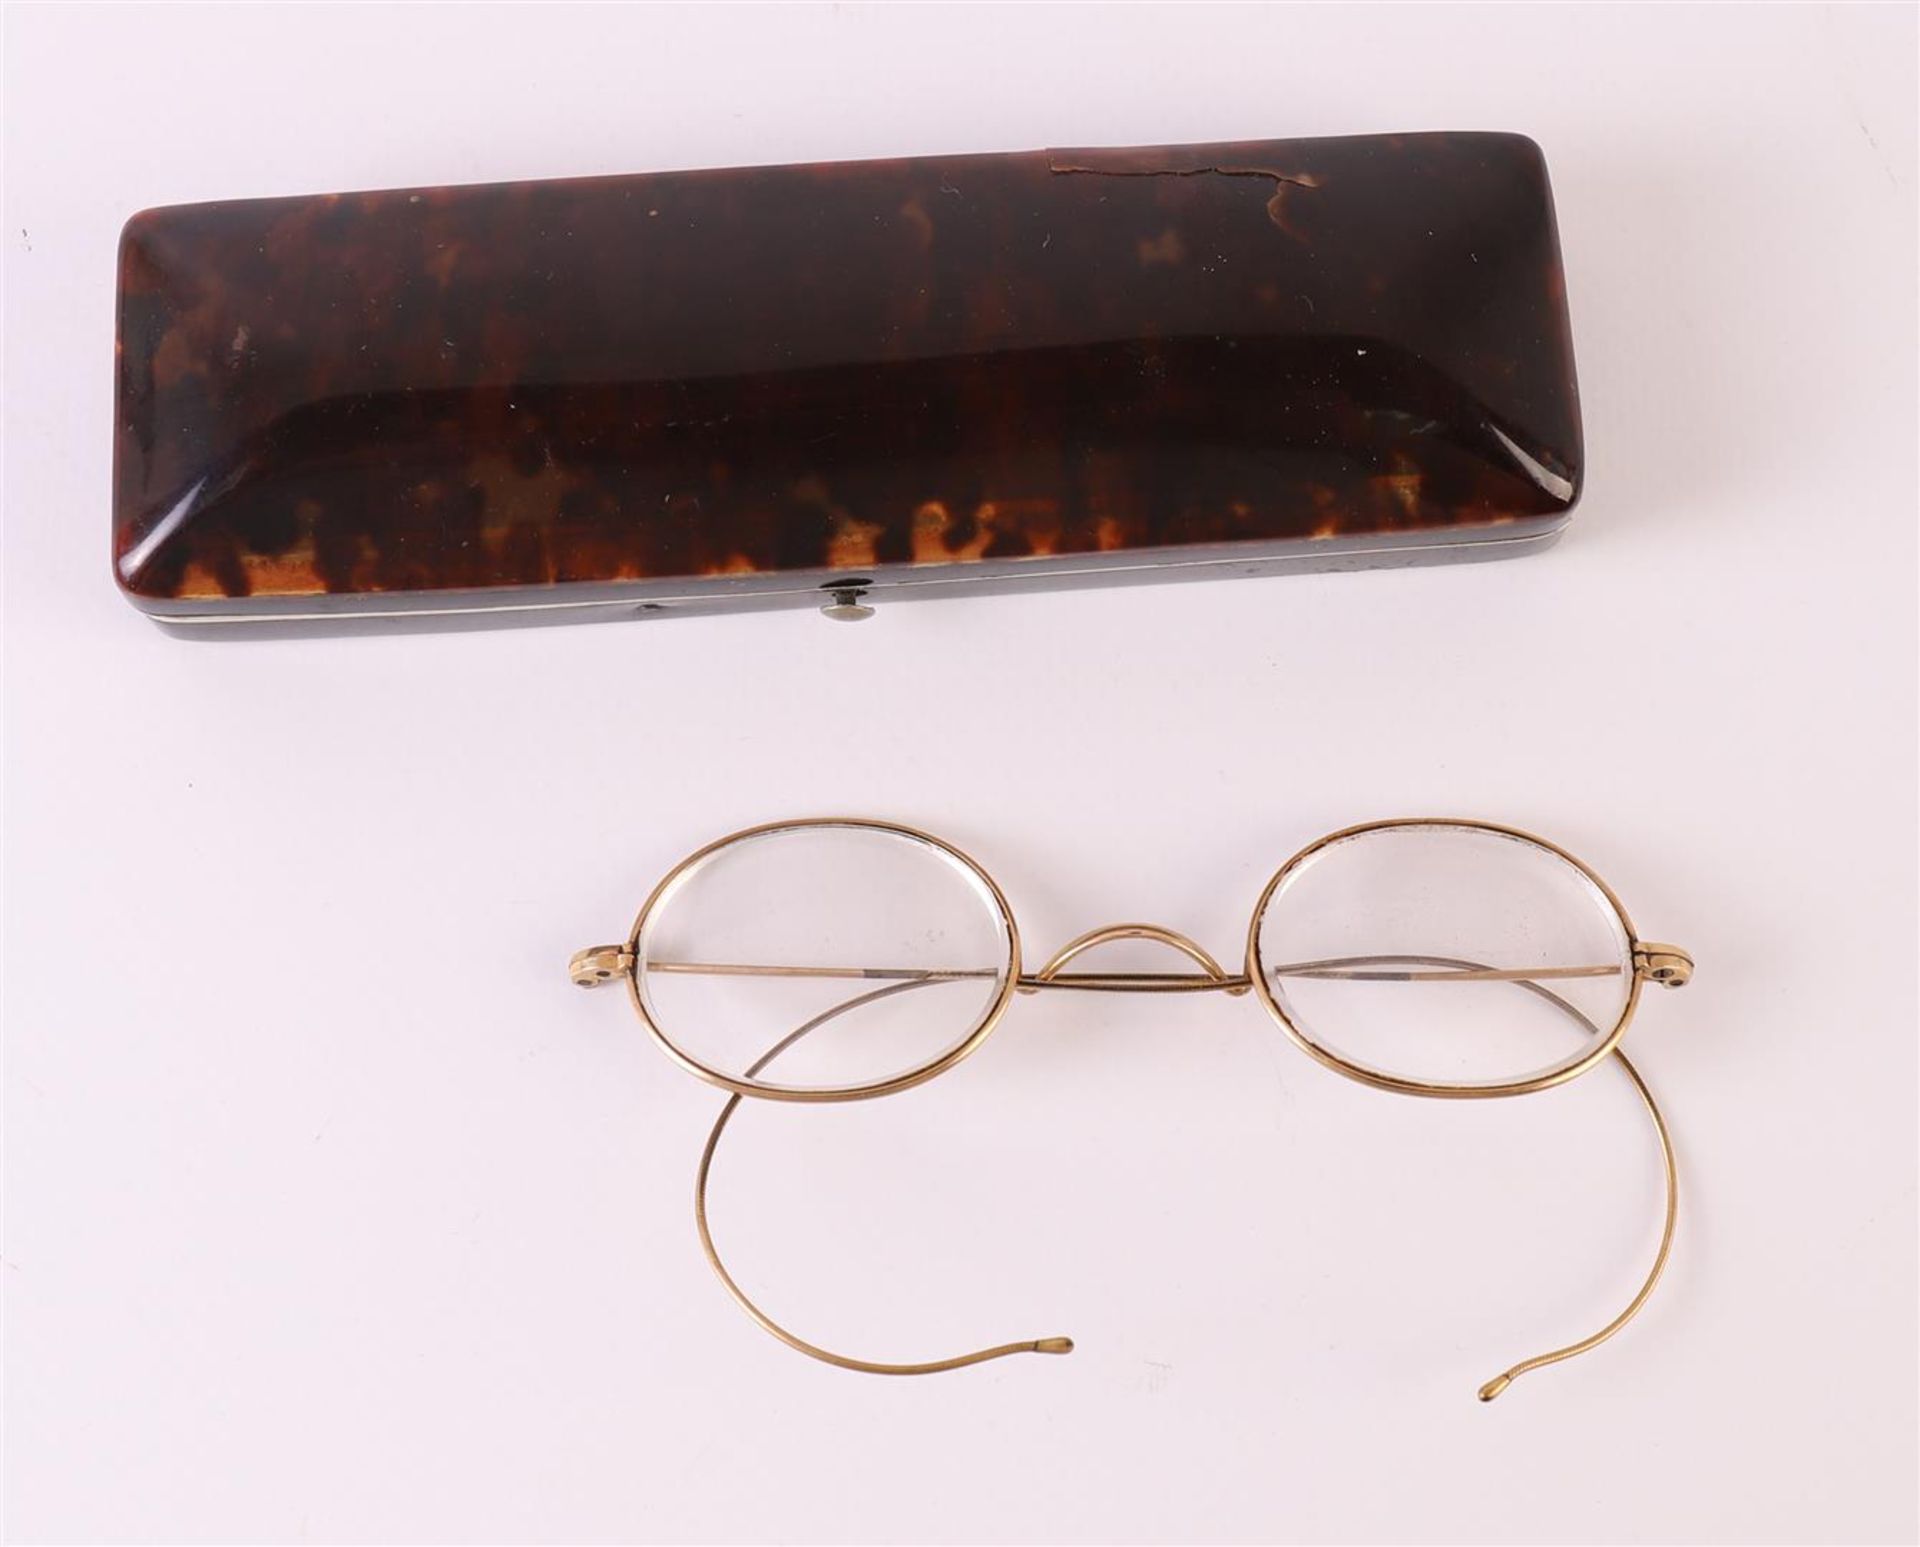 A rectangular tortoiseshell spectacle case containing glasses, late 19th century